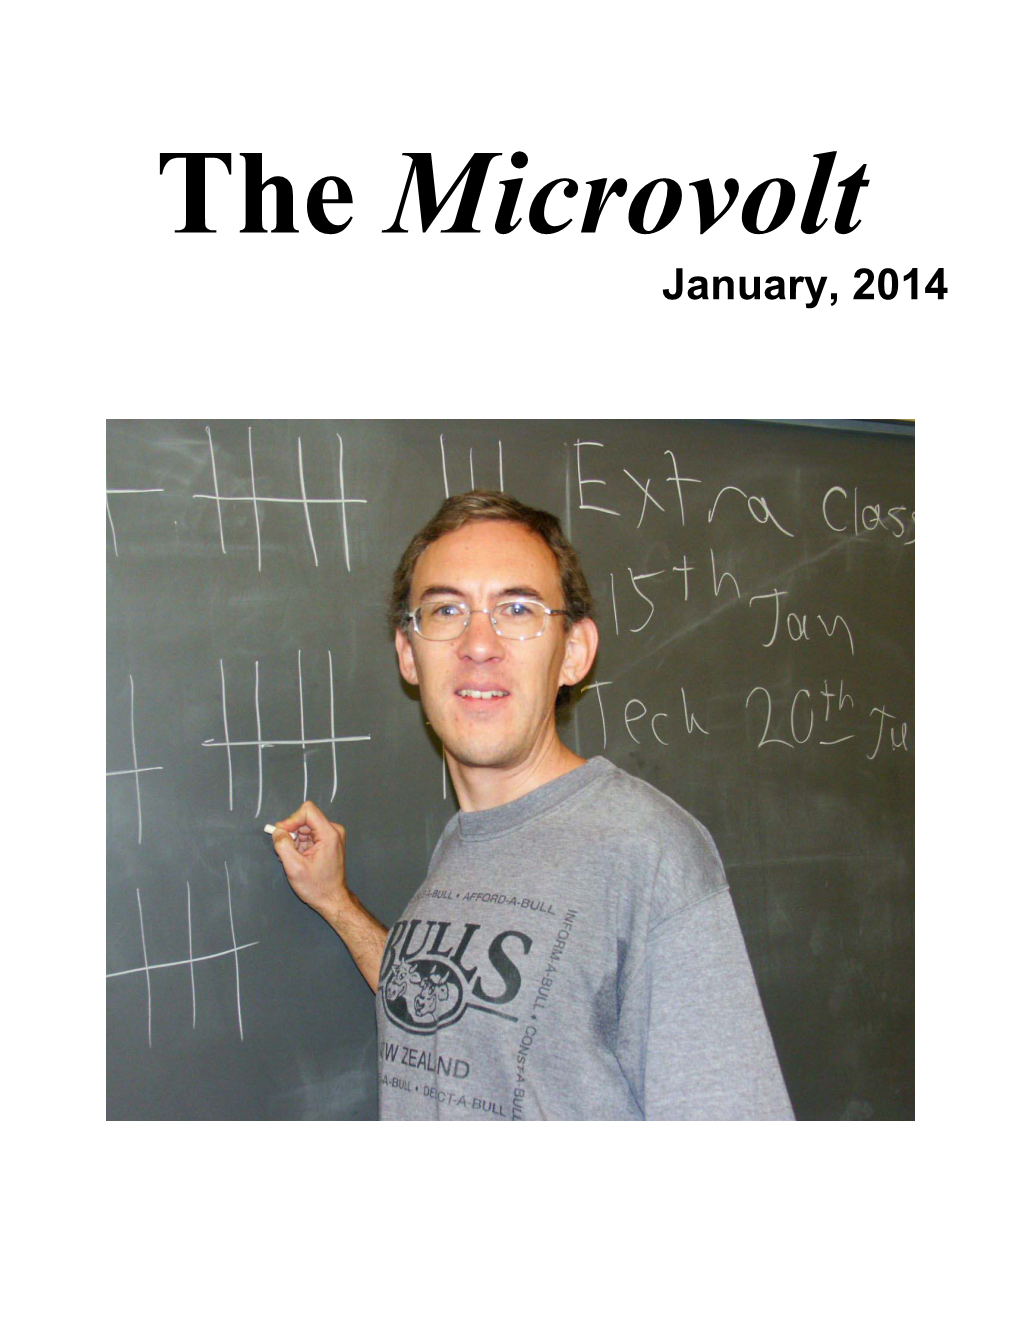 The Microvolt January, 2014